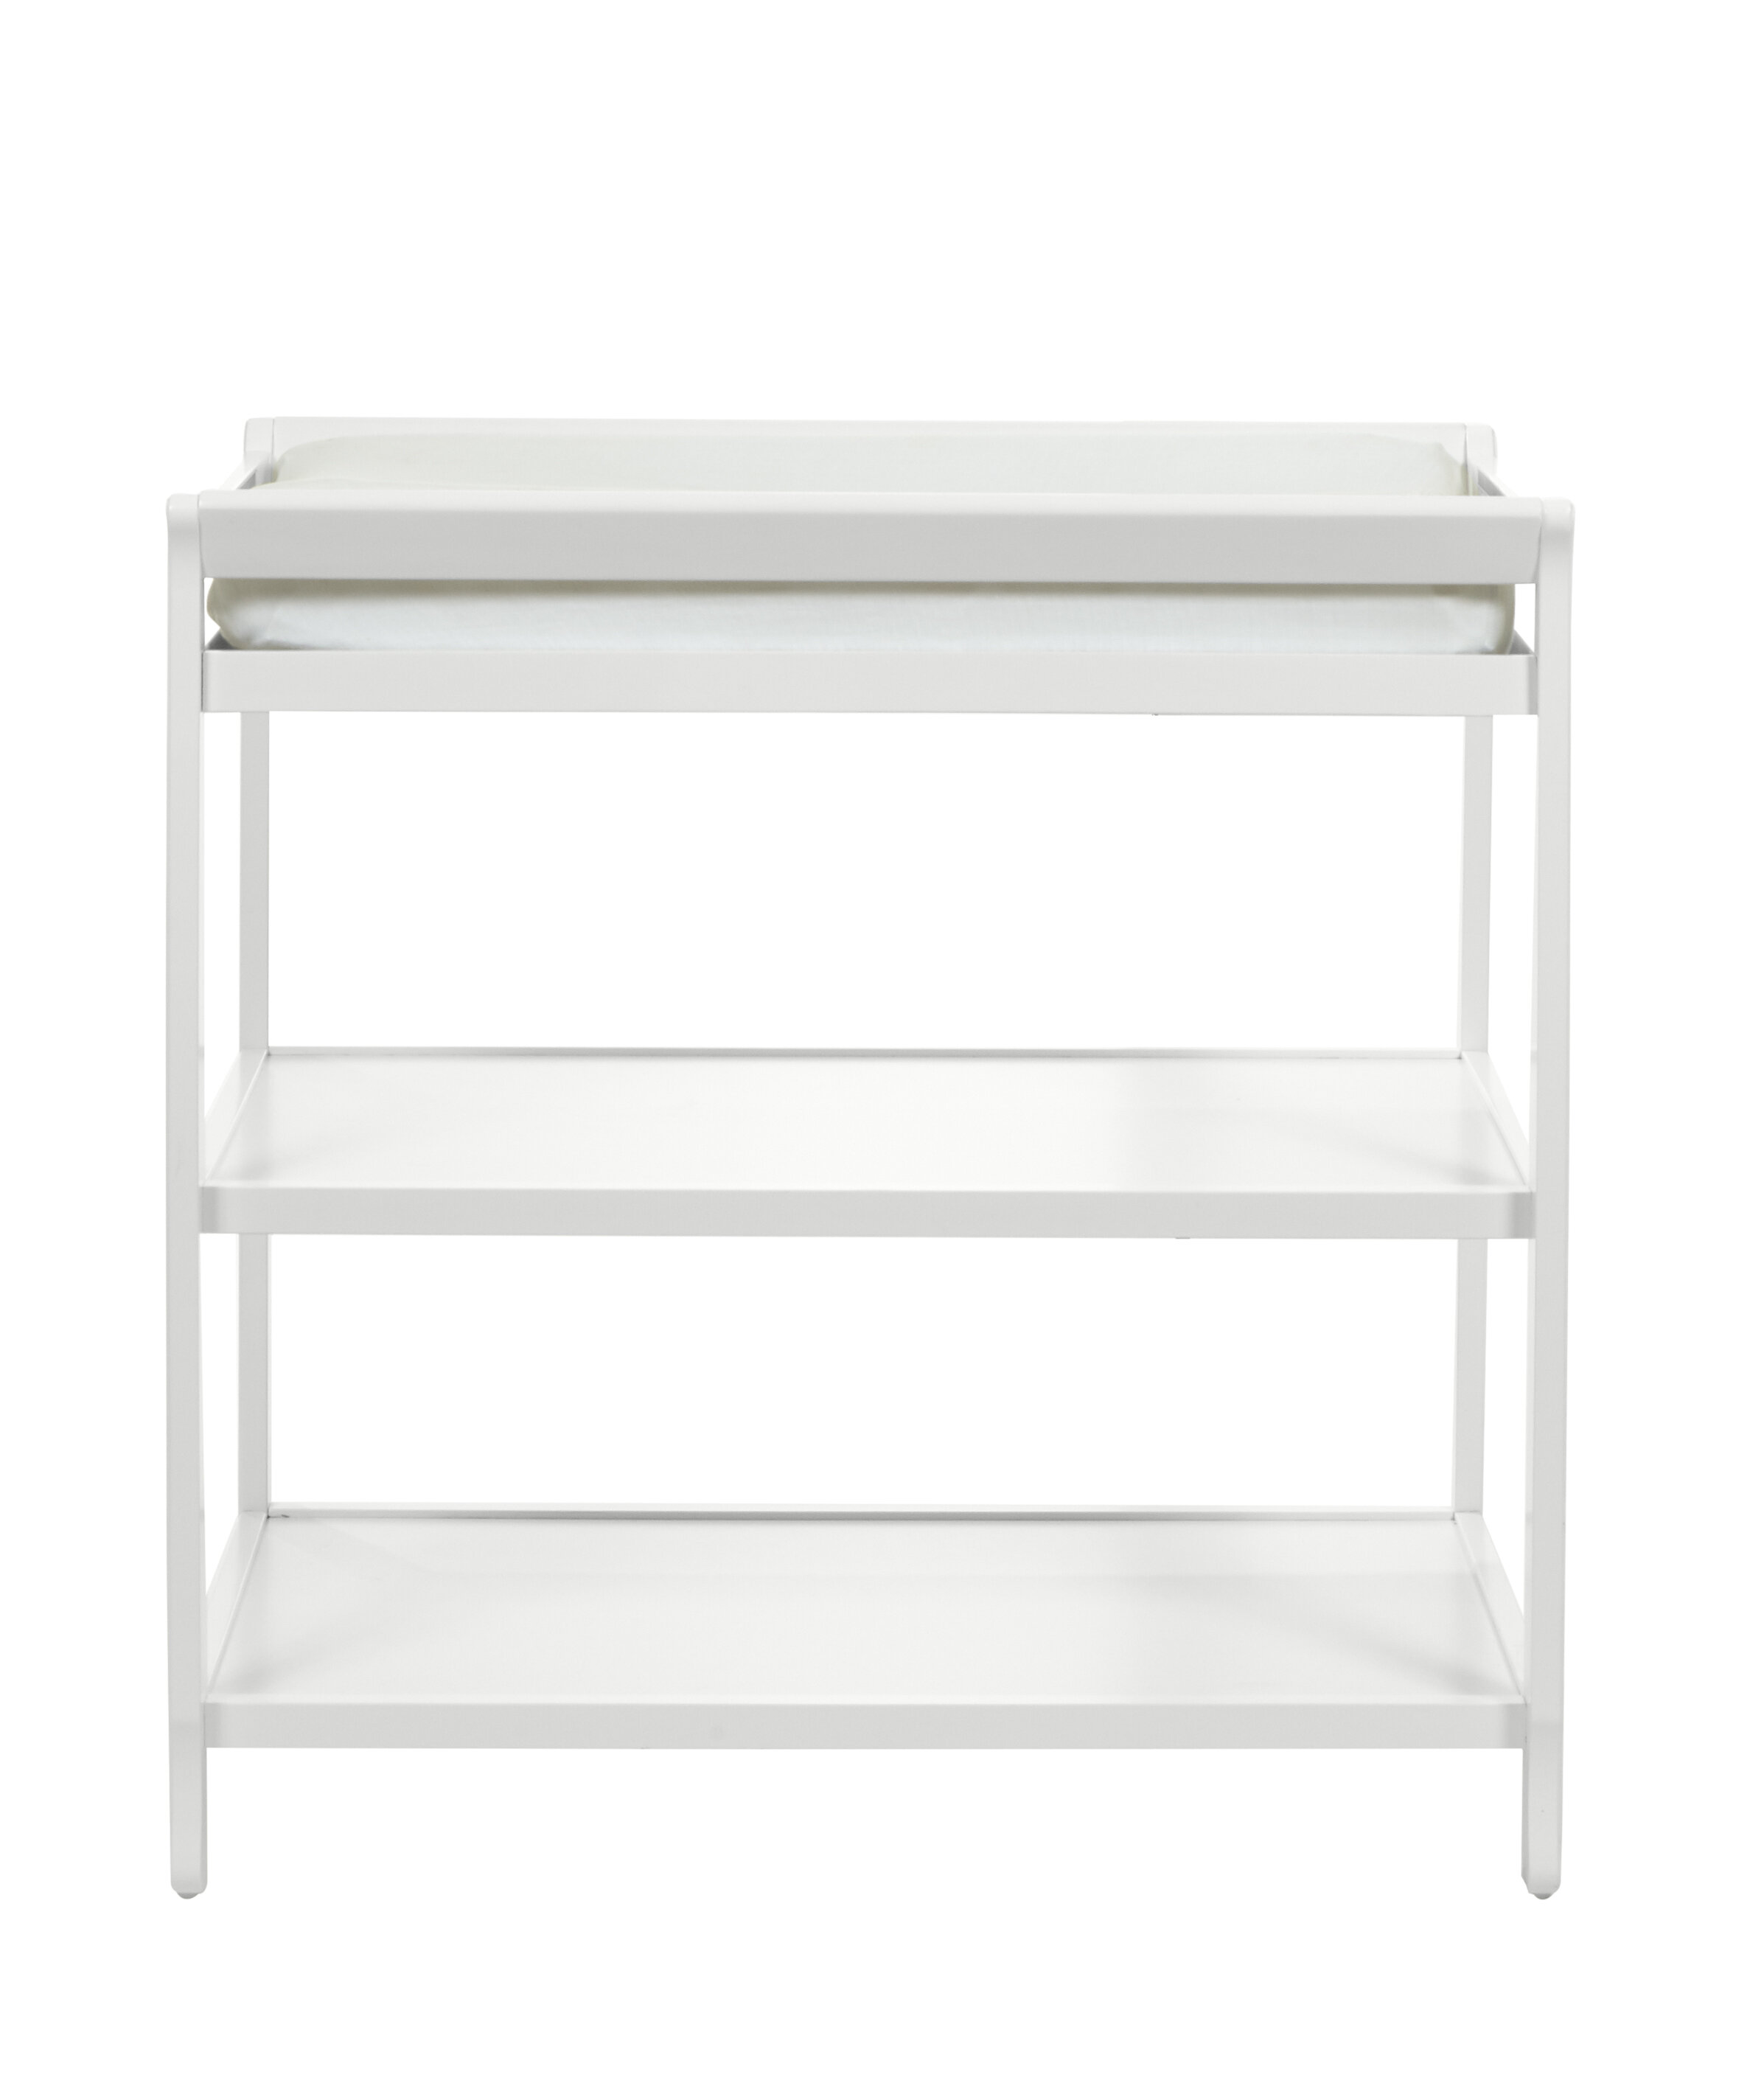 carter's by davinci colby changing table